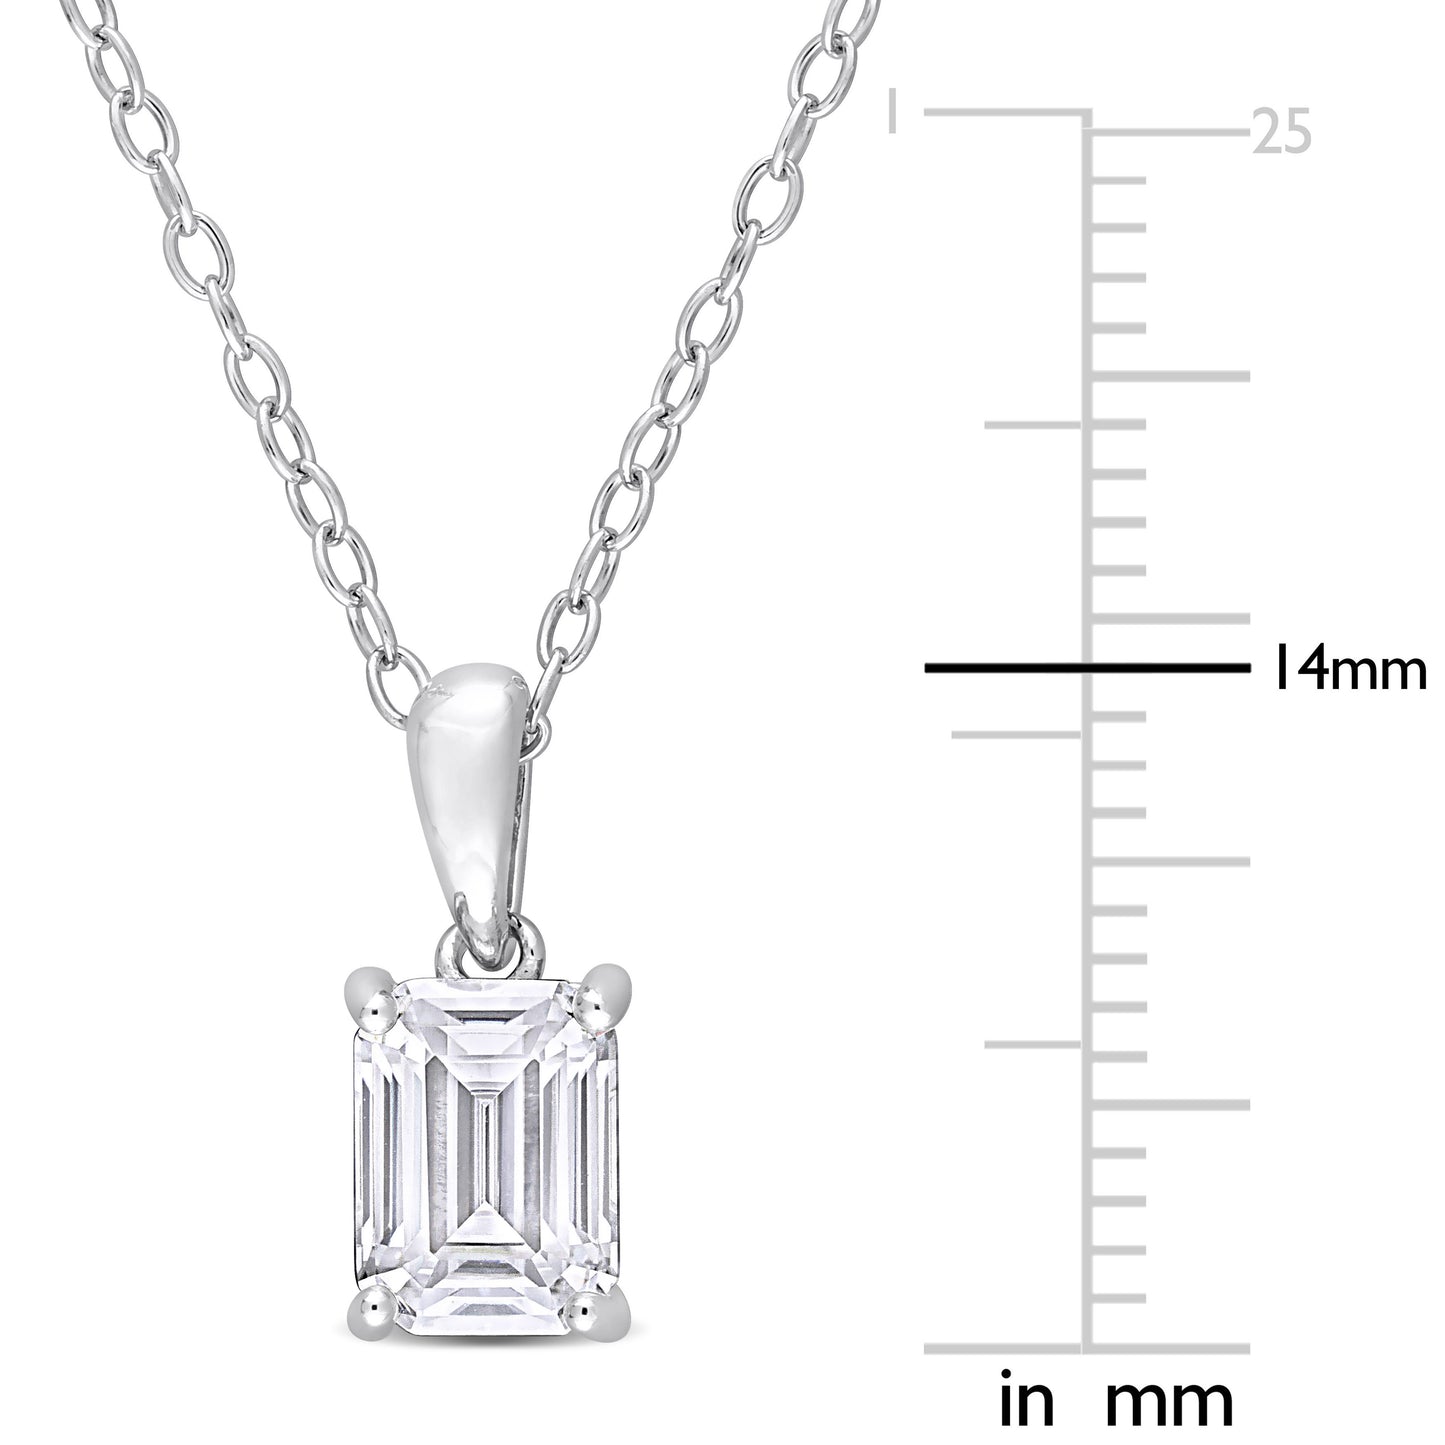 1ct Emerald Cut Moissanite Solitaire Necklace in Sterling Silver